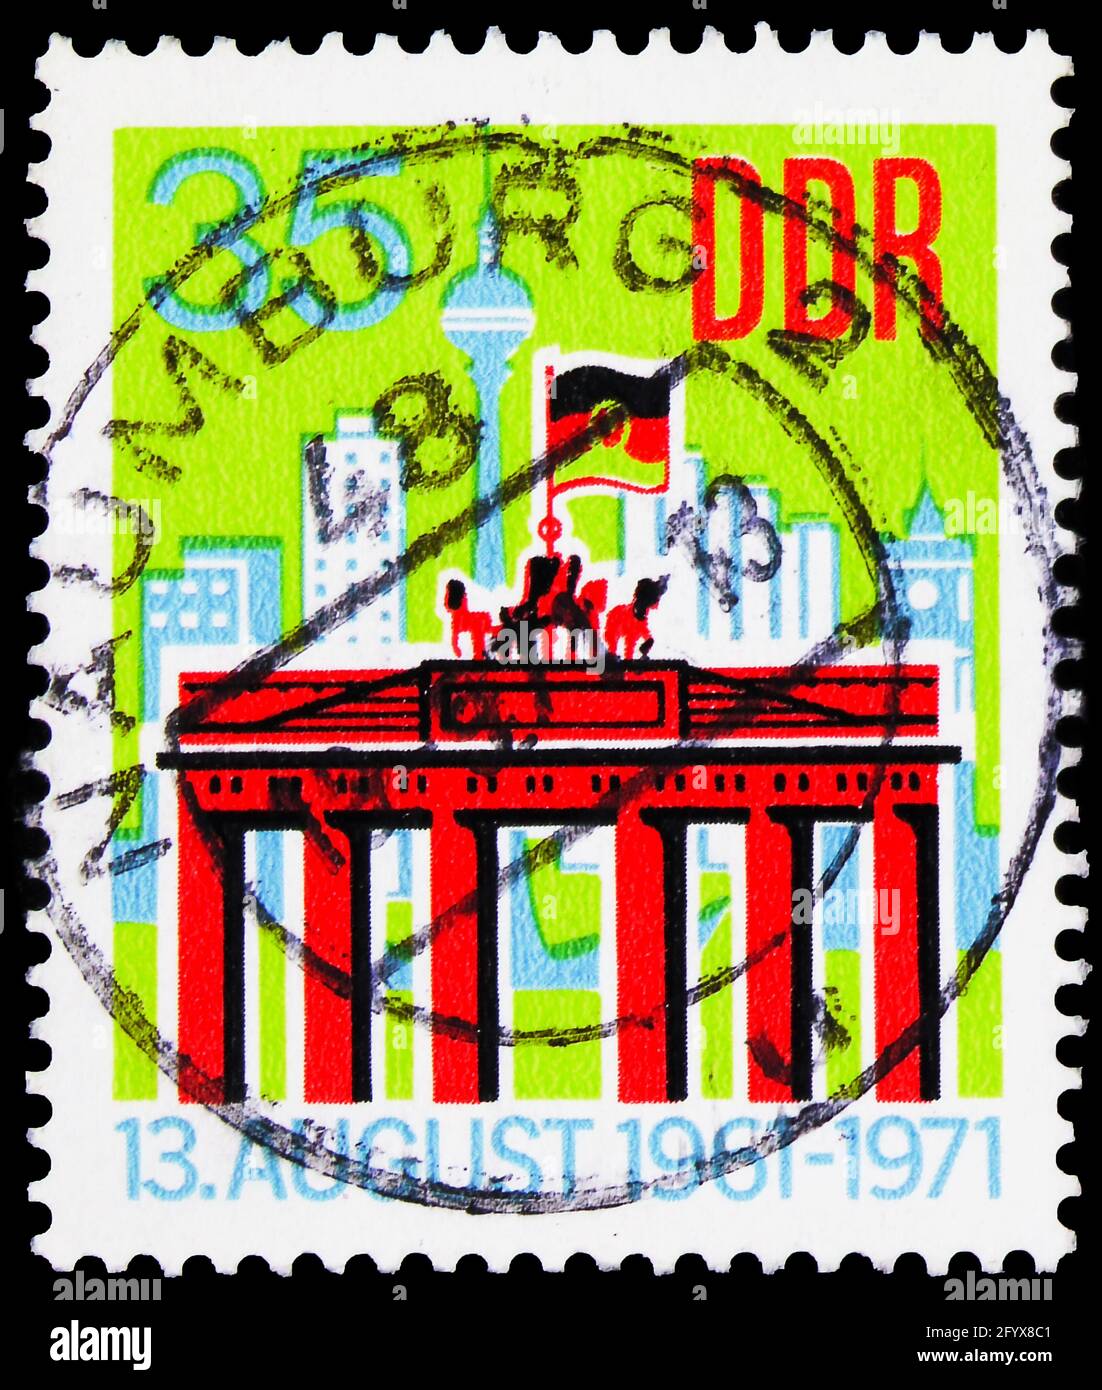 MOSCOW, RUSSIA - SEPTEMBER 27, 2019: Postage stamp printed in Germany, Democratic Republic, shows The Brandenburg Gate, 35 Pf. - East German pfennig, Stock Photo